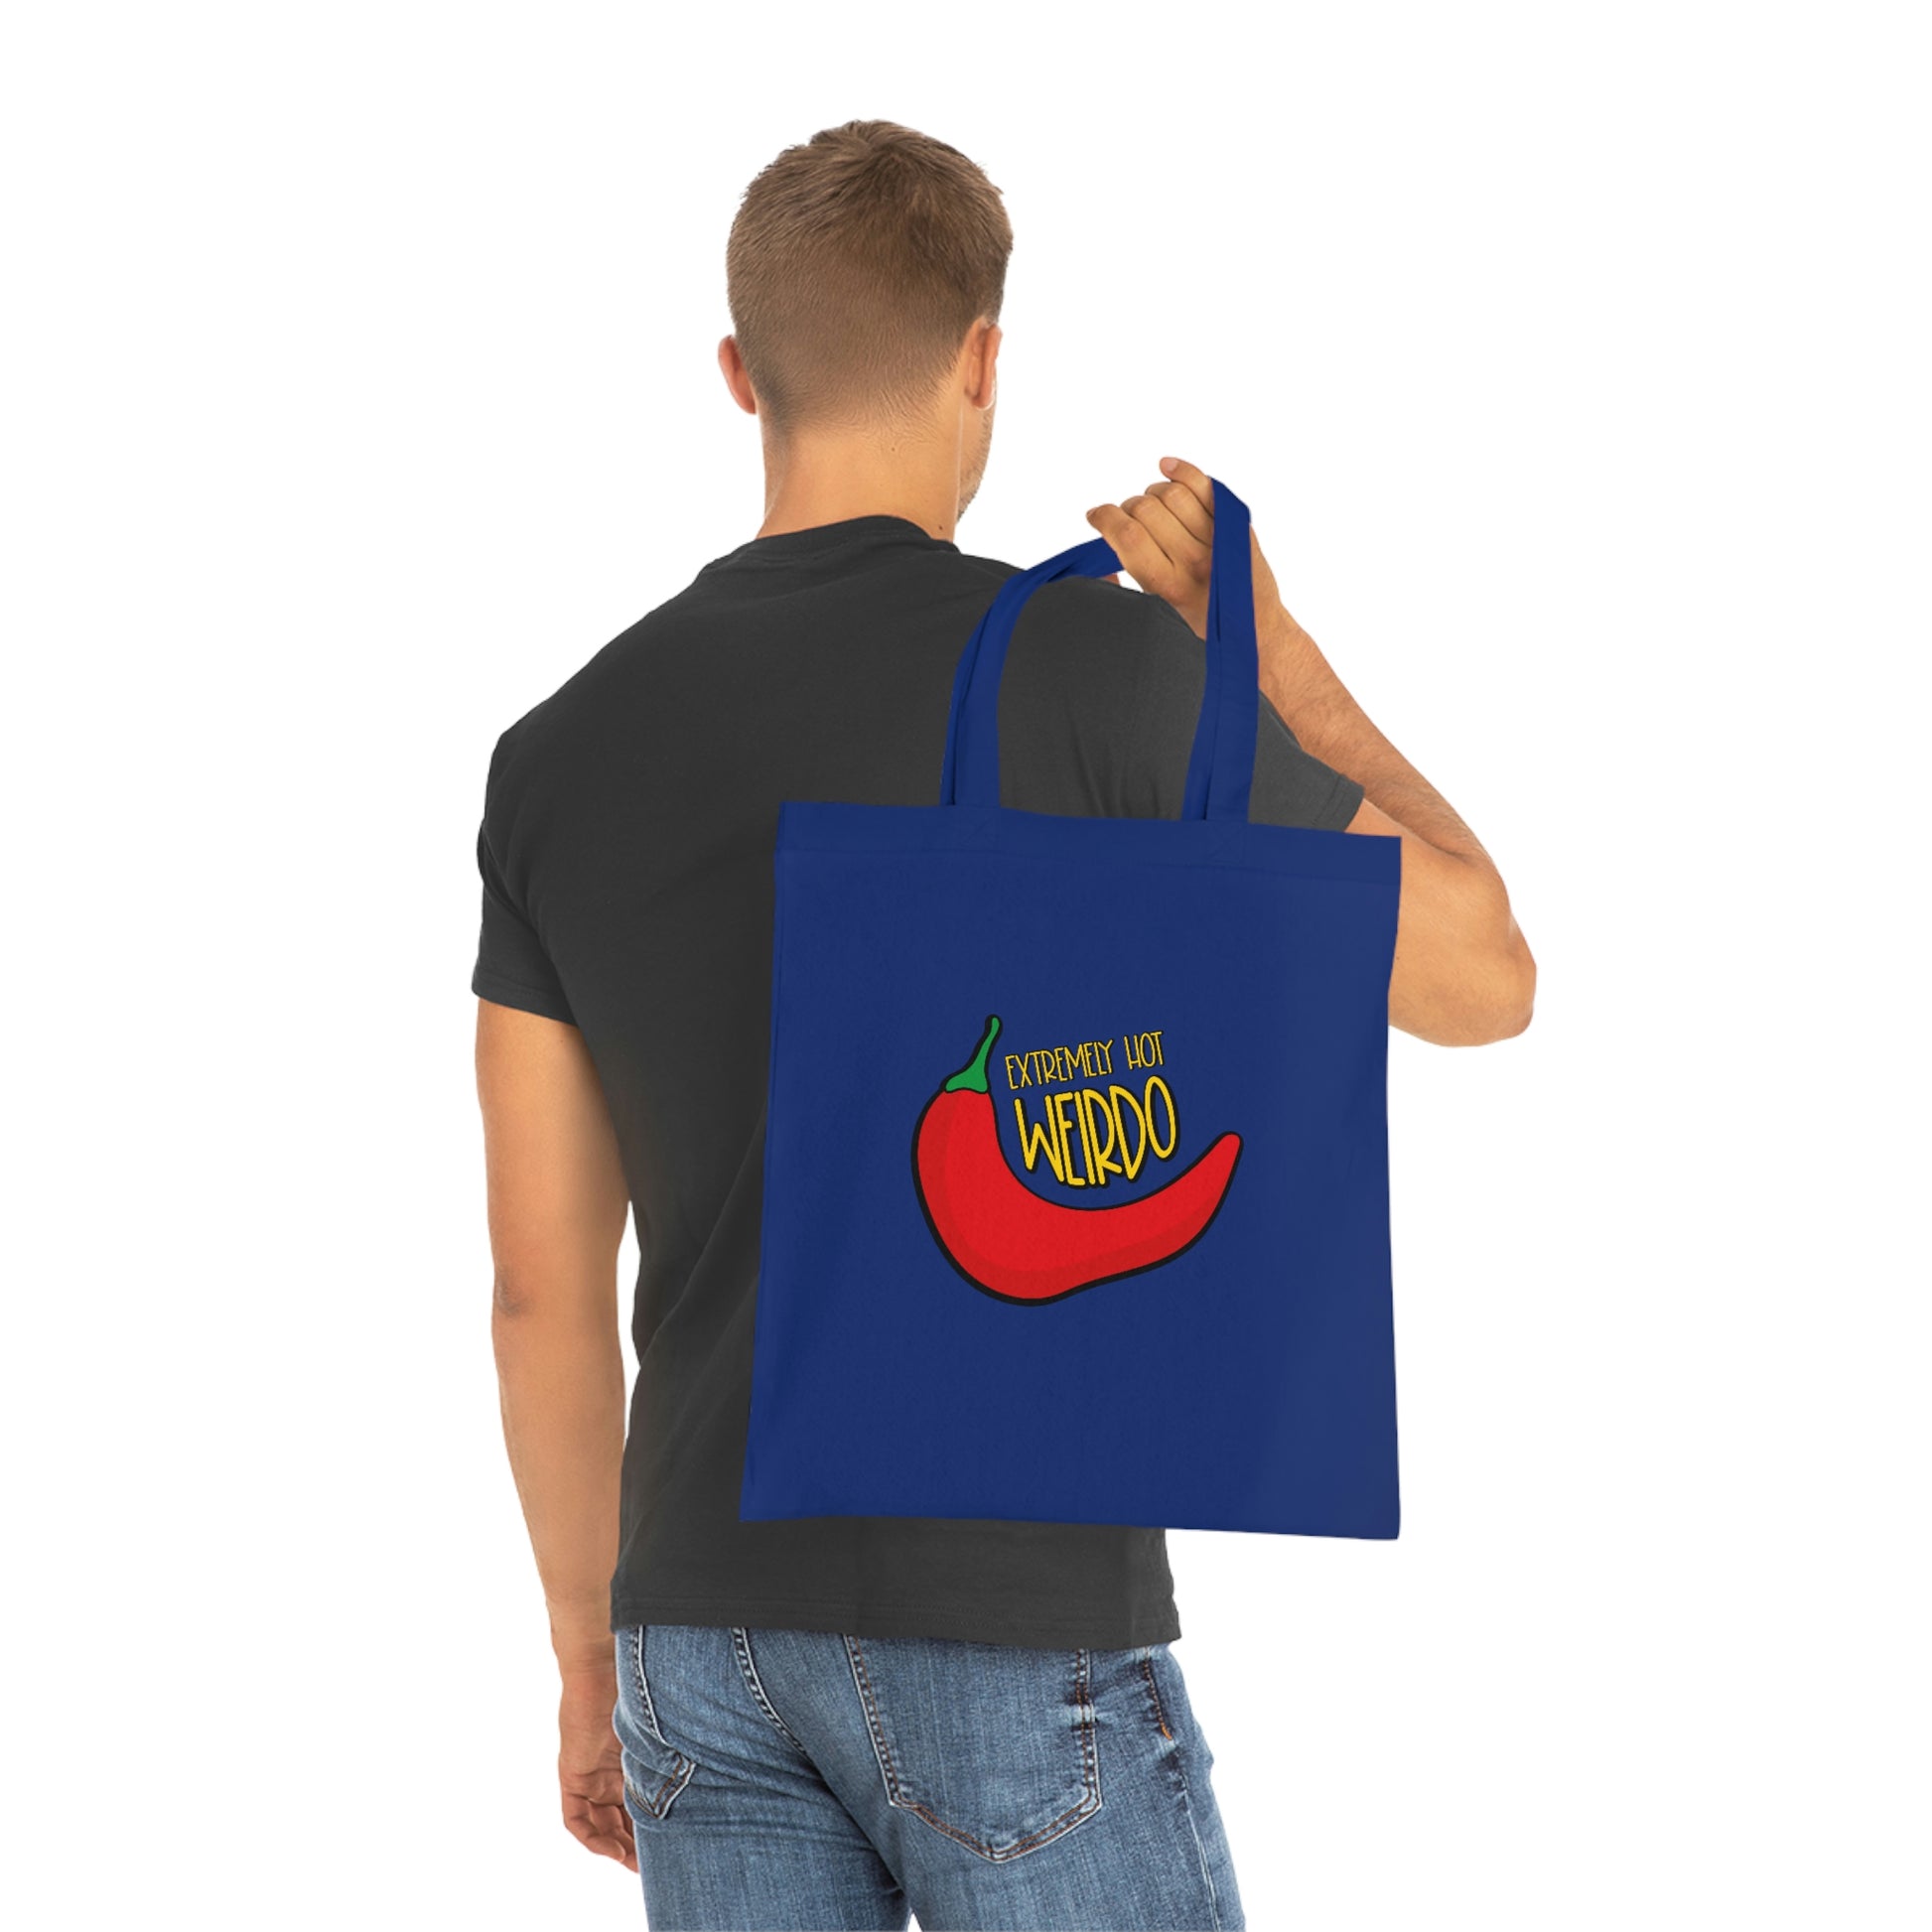 Weirdo | If you consider yourself a weirdo and extremely hot, then this shopping bag is definitely for you! This royal blue tote bag is 100% cotton and ideal for your everyday shopping.